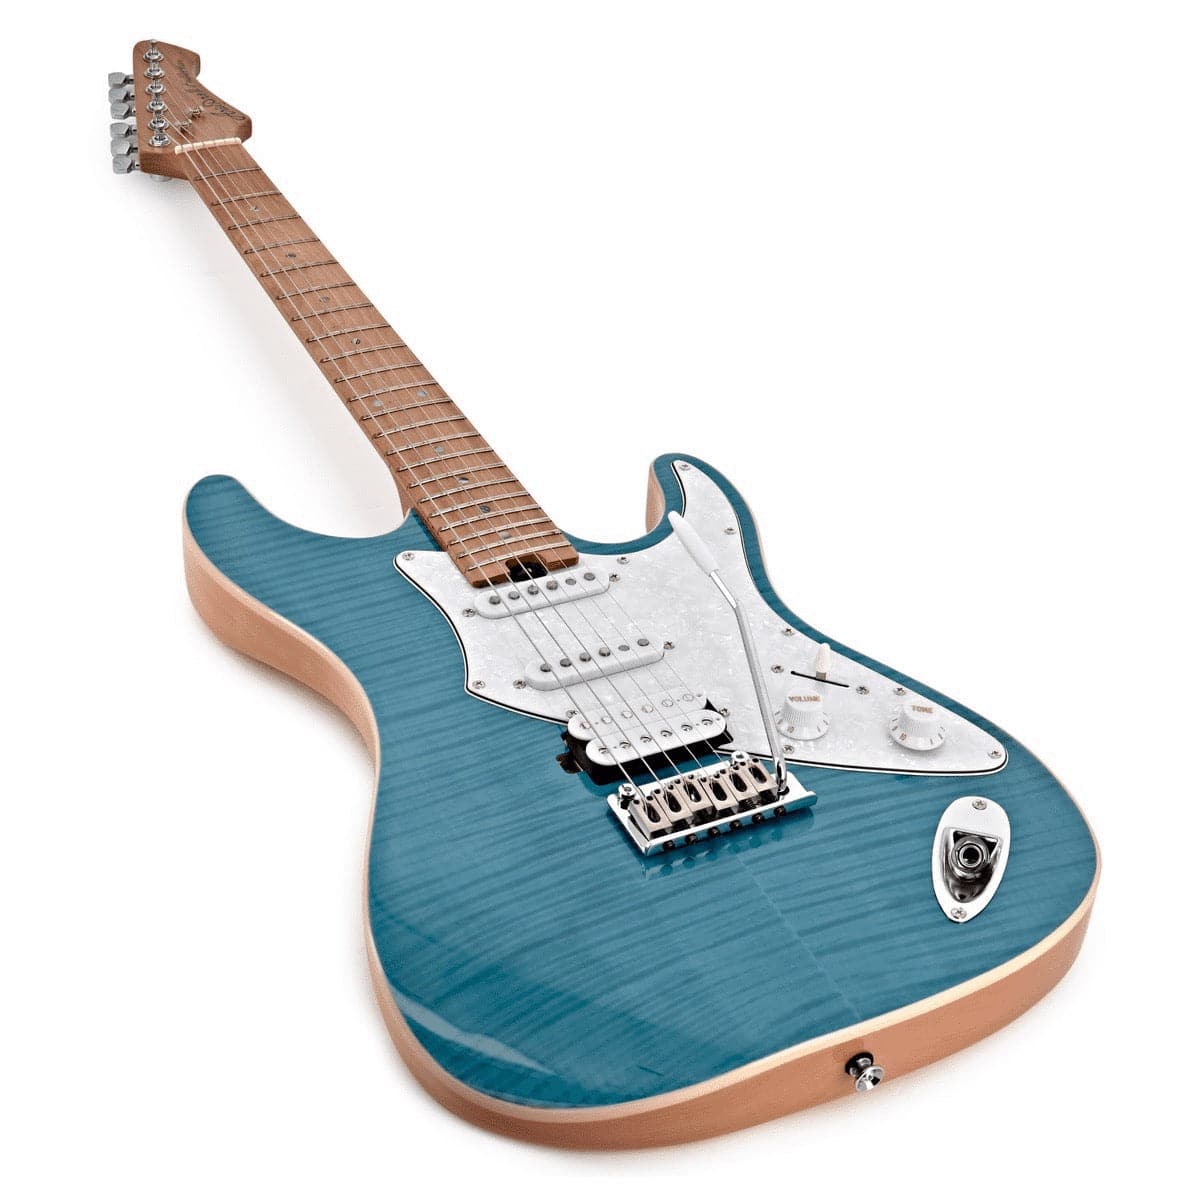 Aria Pro II 714 MK2 Hot Rod Collection Electric Guitar - Turquoise Blue